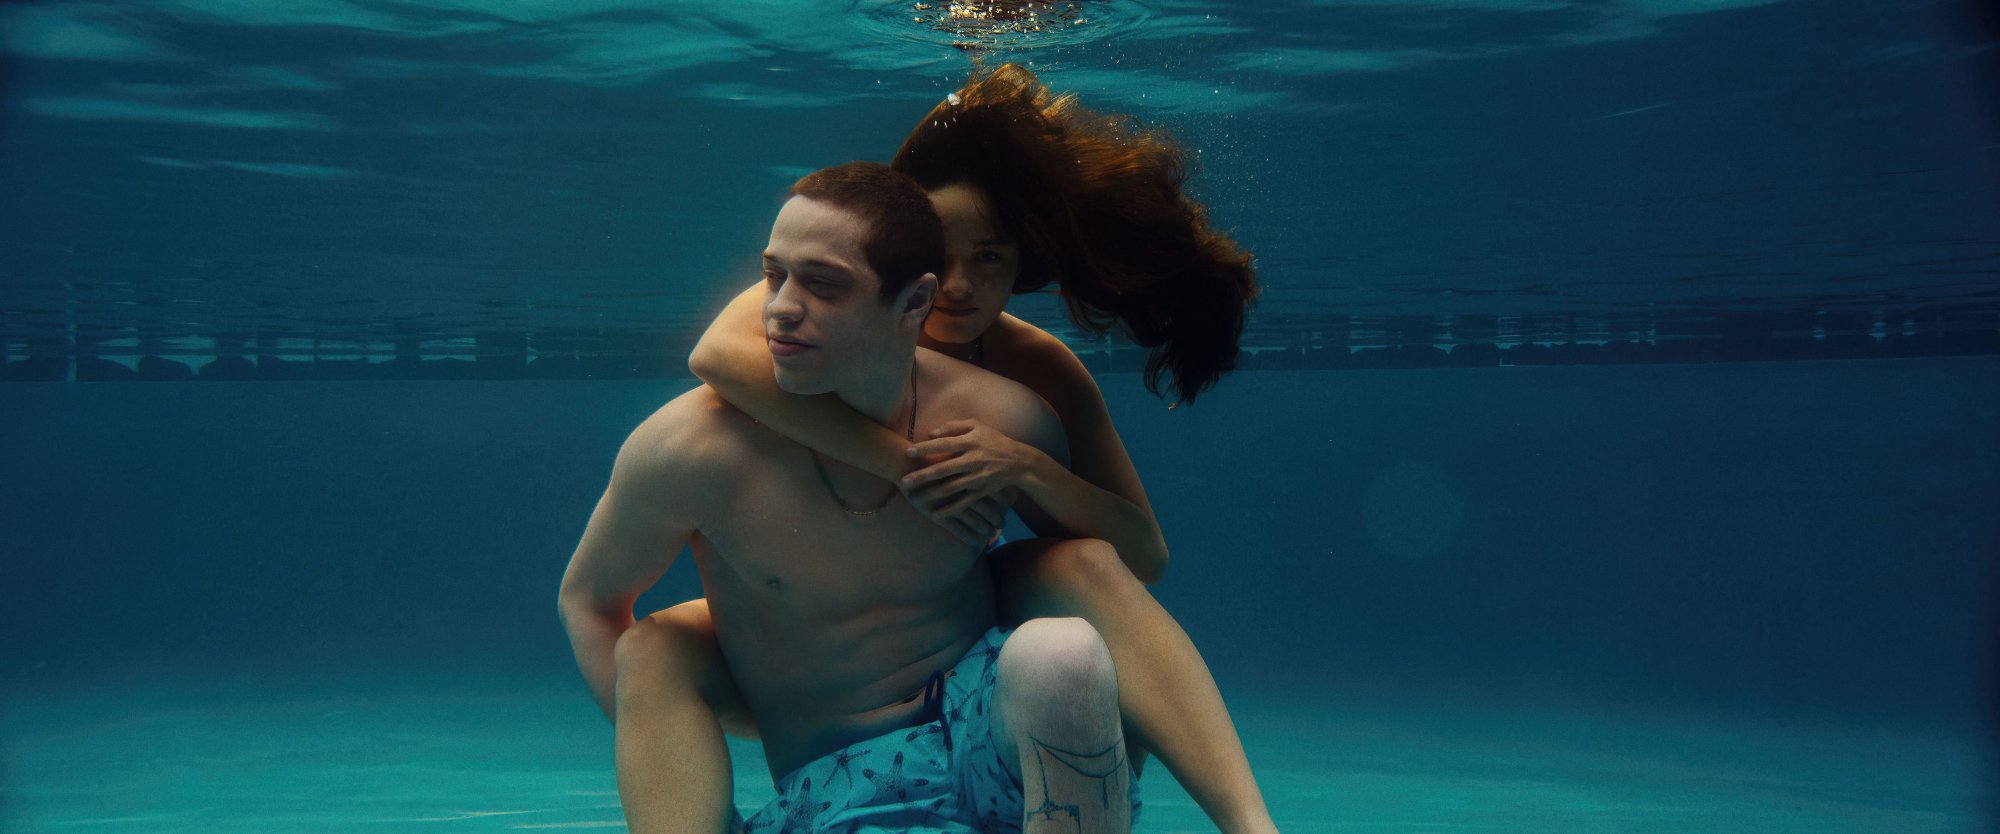 'Bodies Bodies Bodies' Pete Davidson as David and Chase Sui Wonders as Emma. They're underwater wearing bathing suits with her hanging onto him on his back.